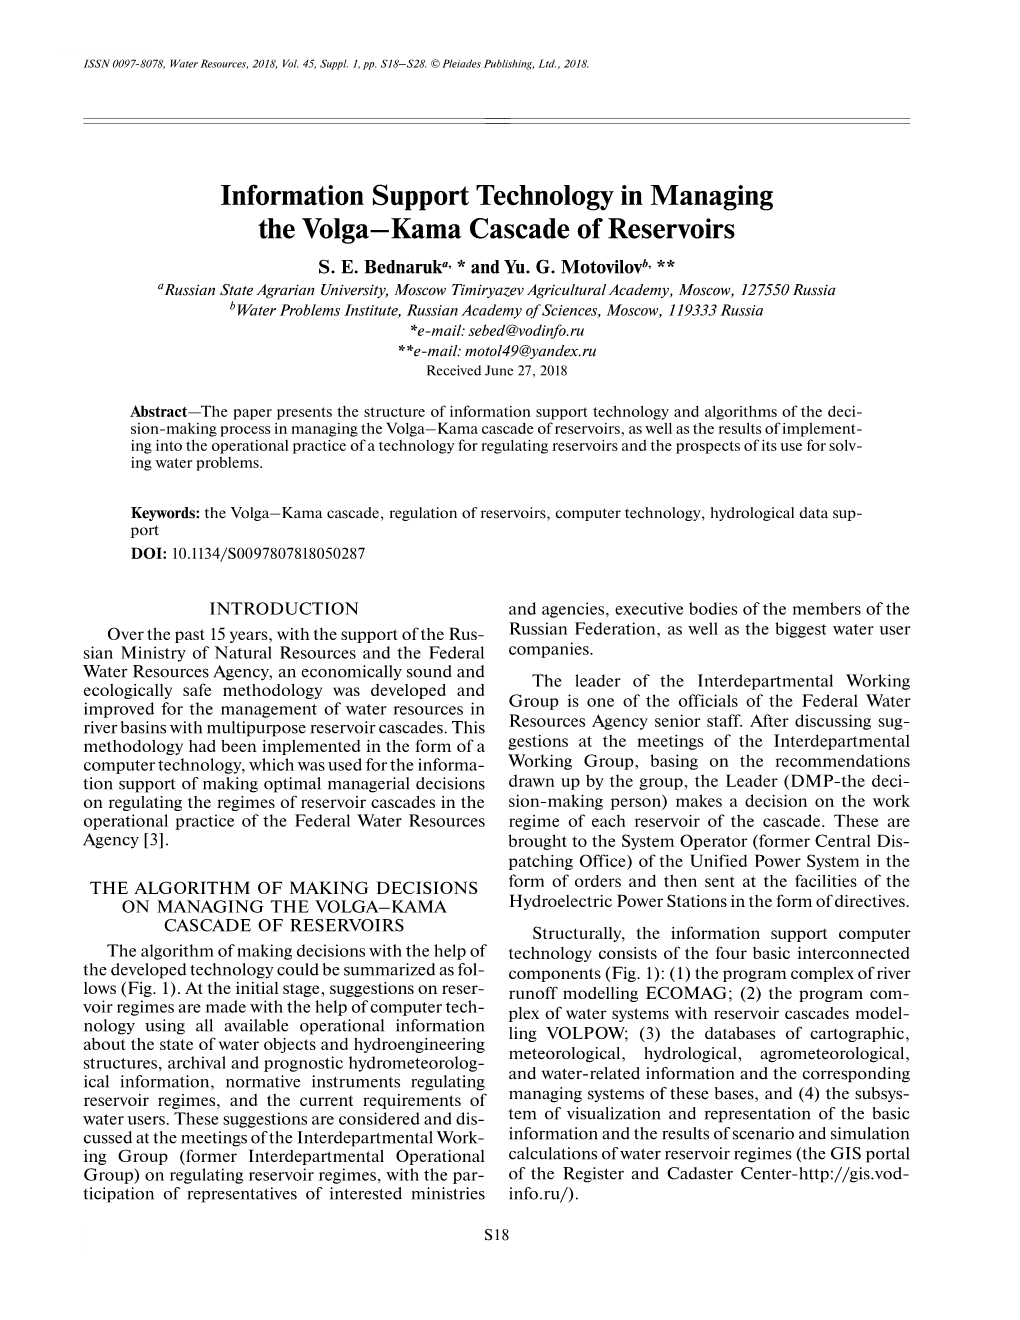 Information Support Technology in Managing the Volga–Kama Cascade of Reservoirs S